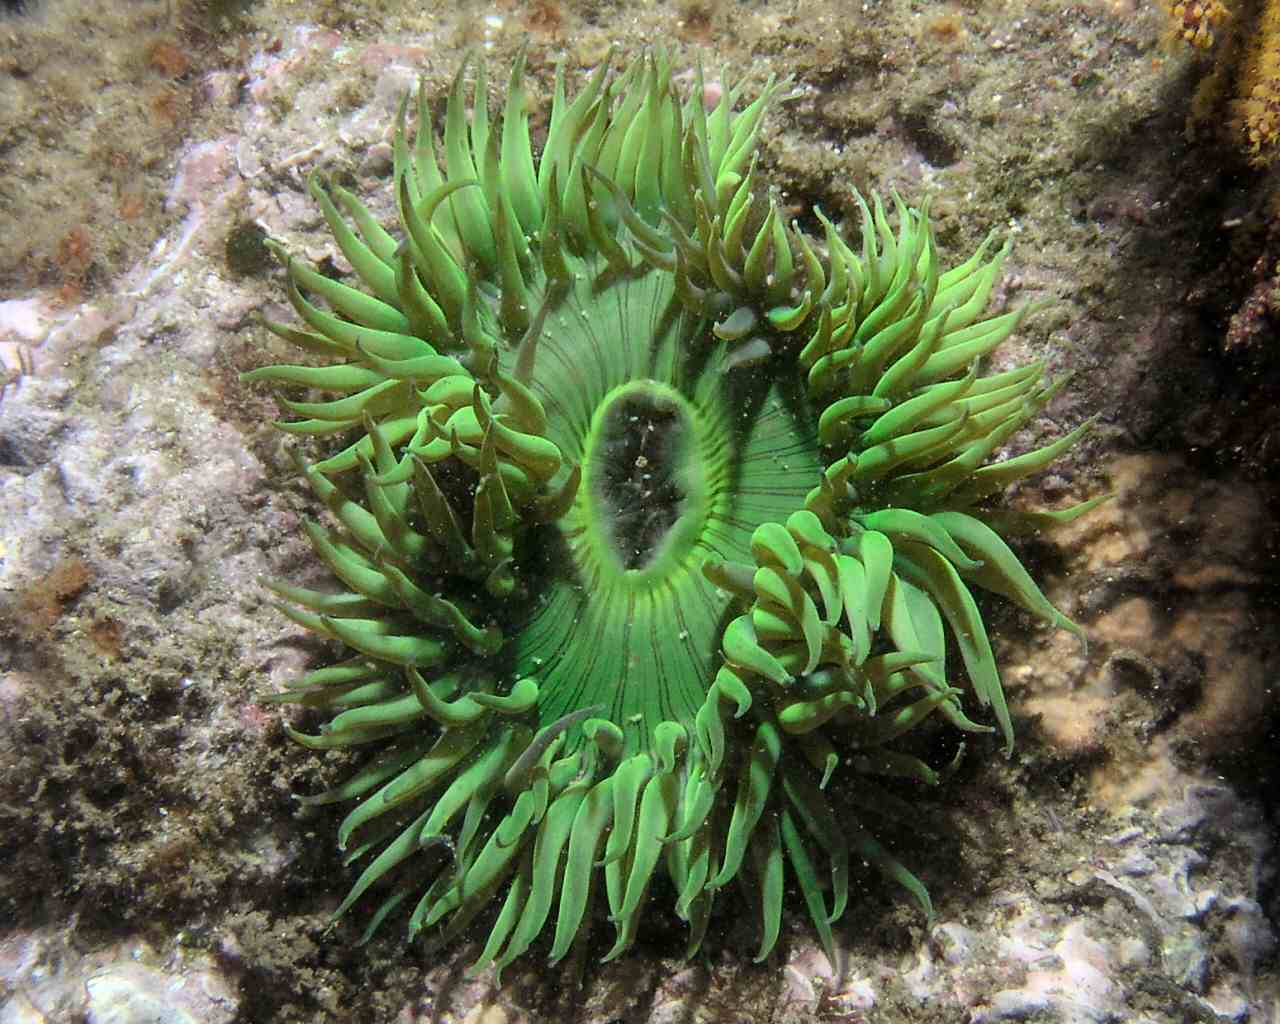 Green Anemone taken at Shaw's Cove